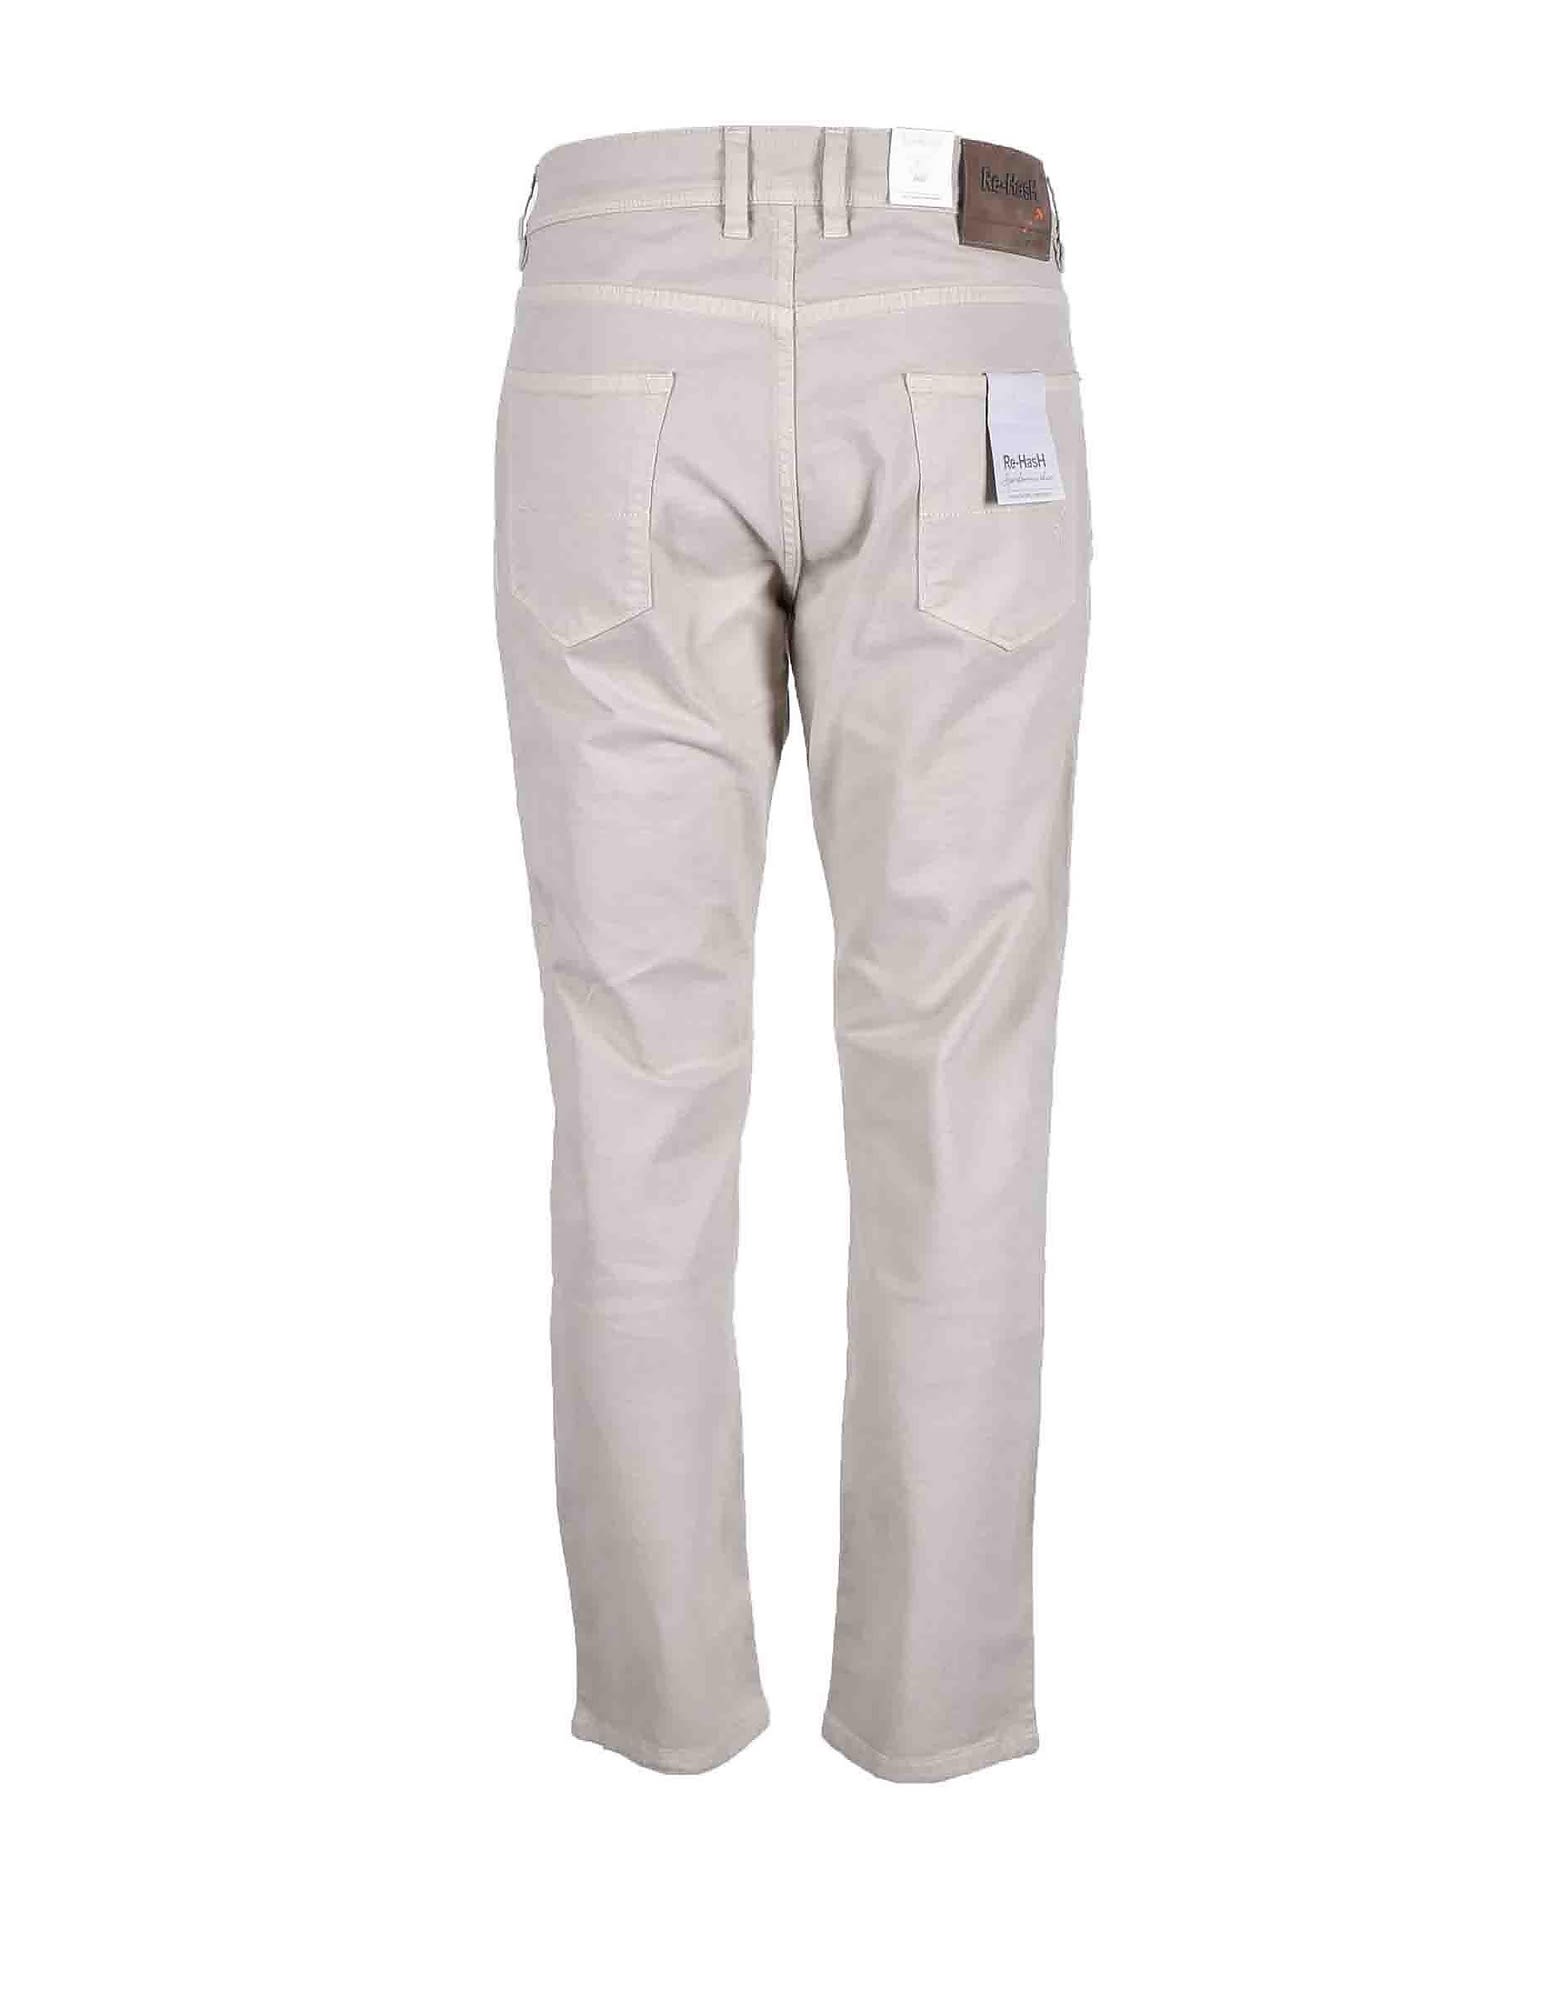 Re-HasH Mens Ivory Jeans